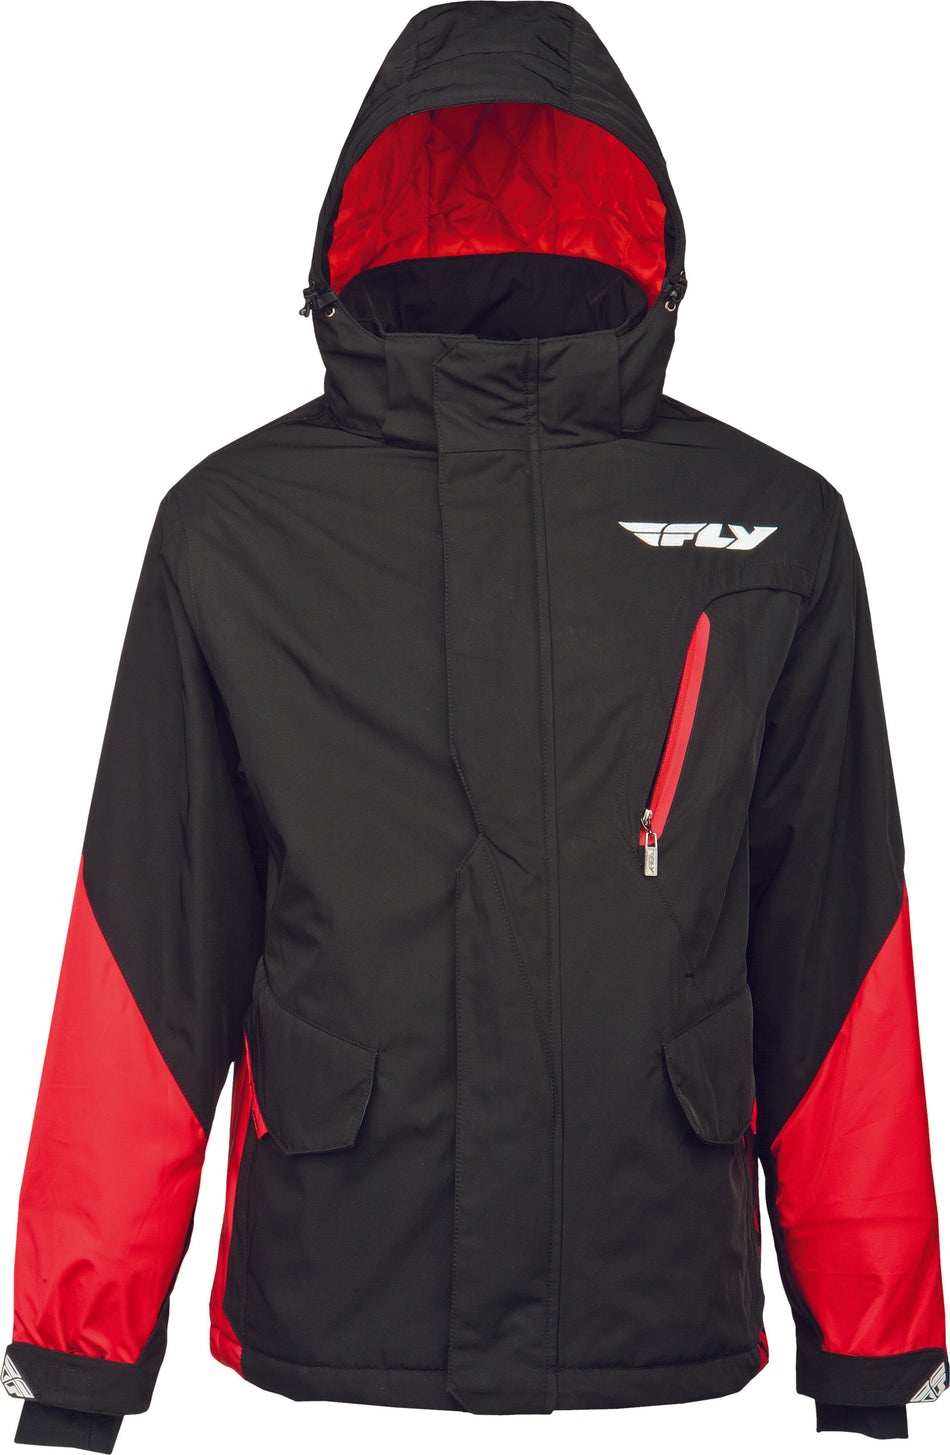 FLY RACING Factory Jacket Red/Black L 354-6162L